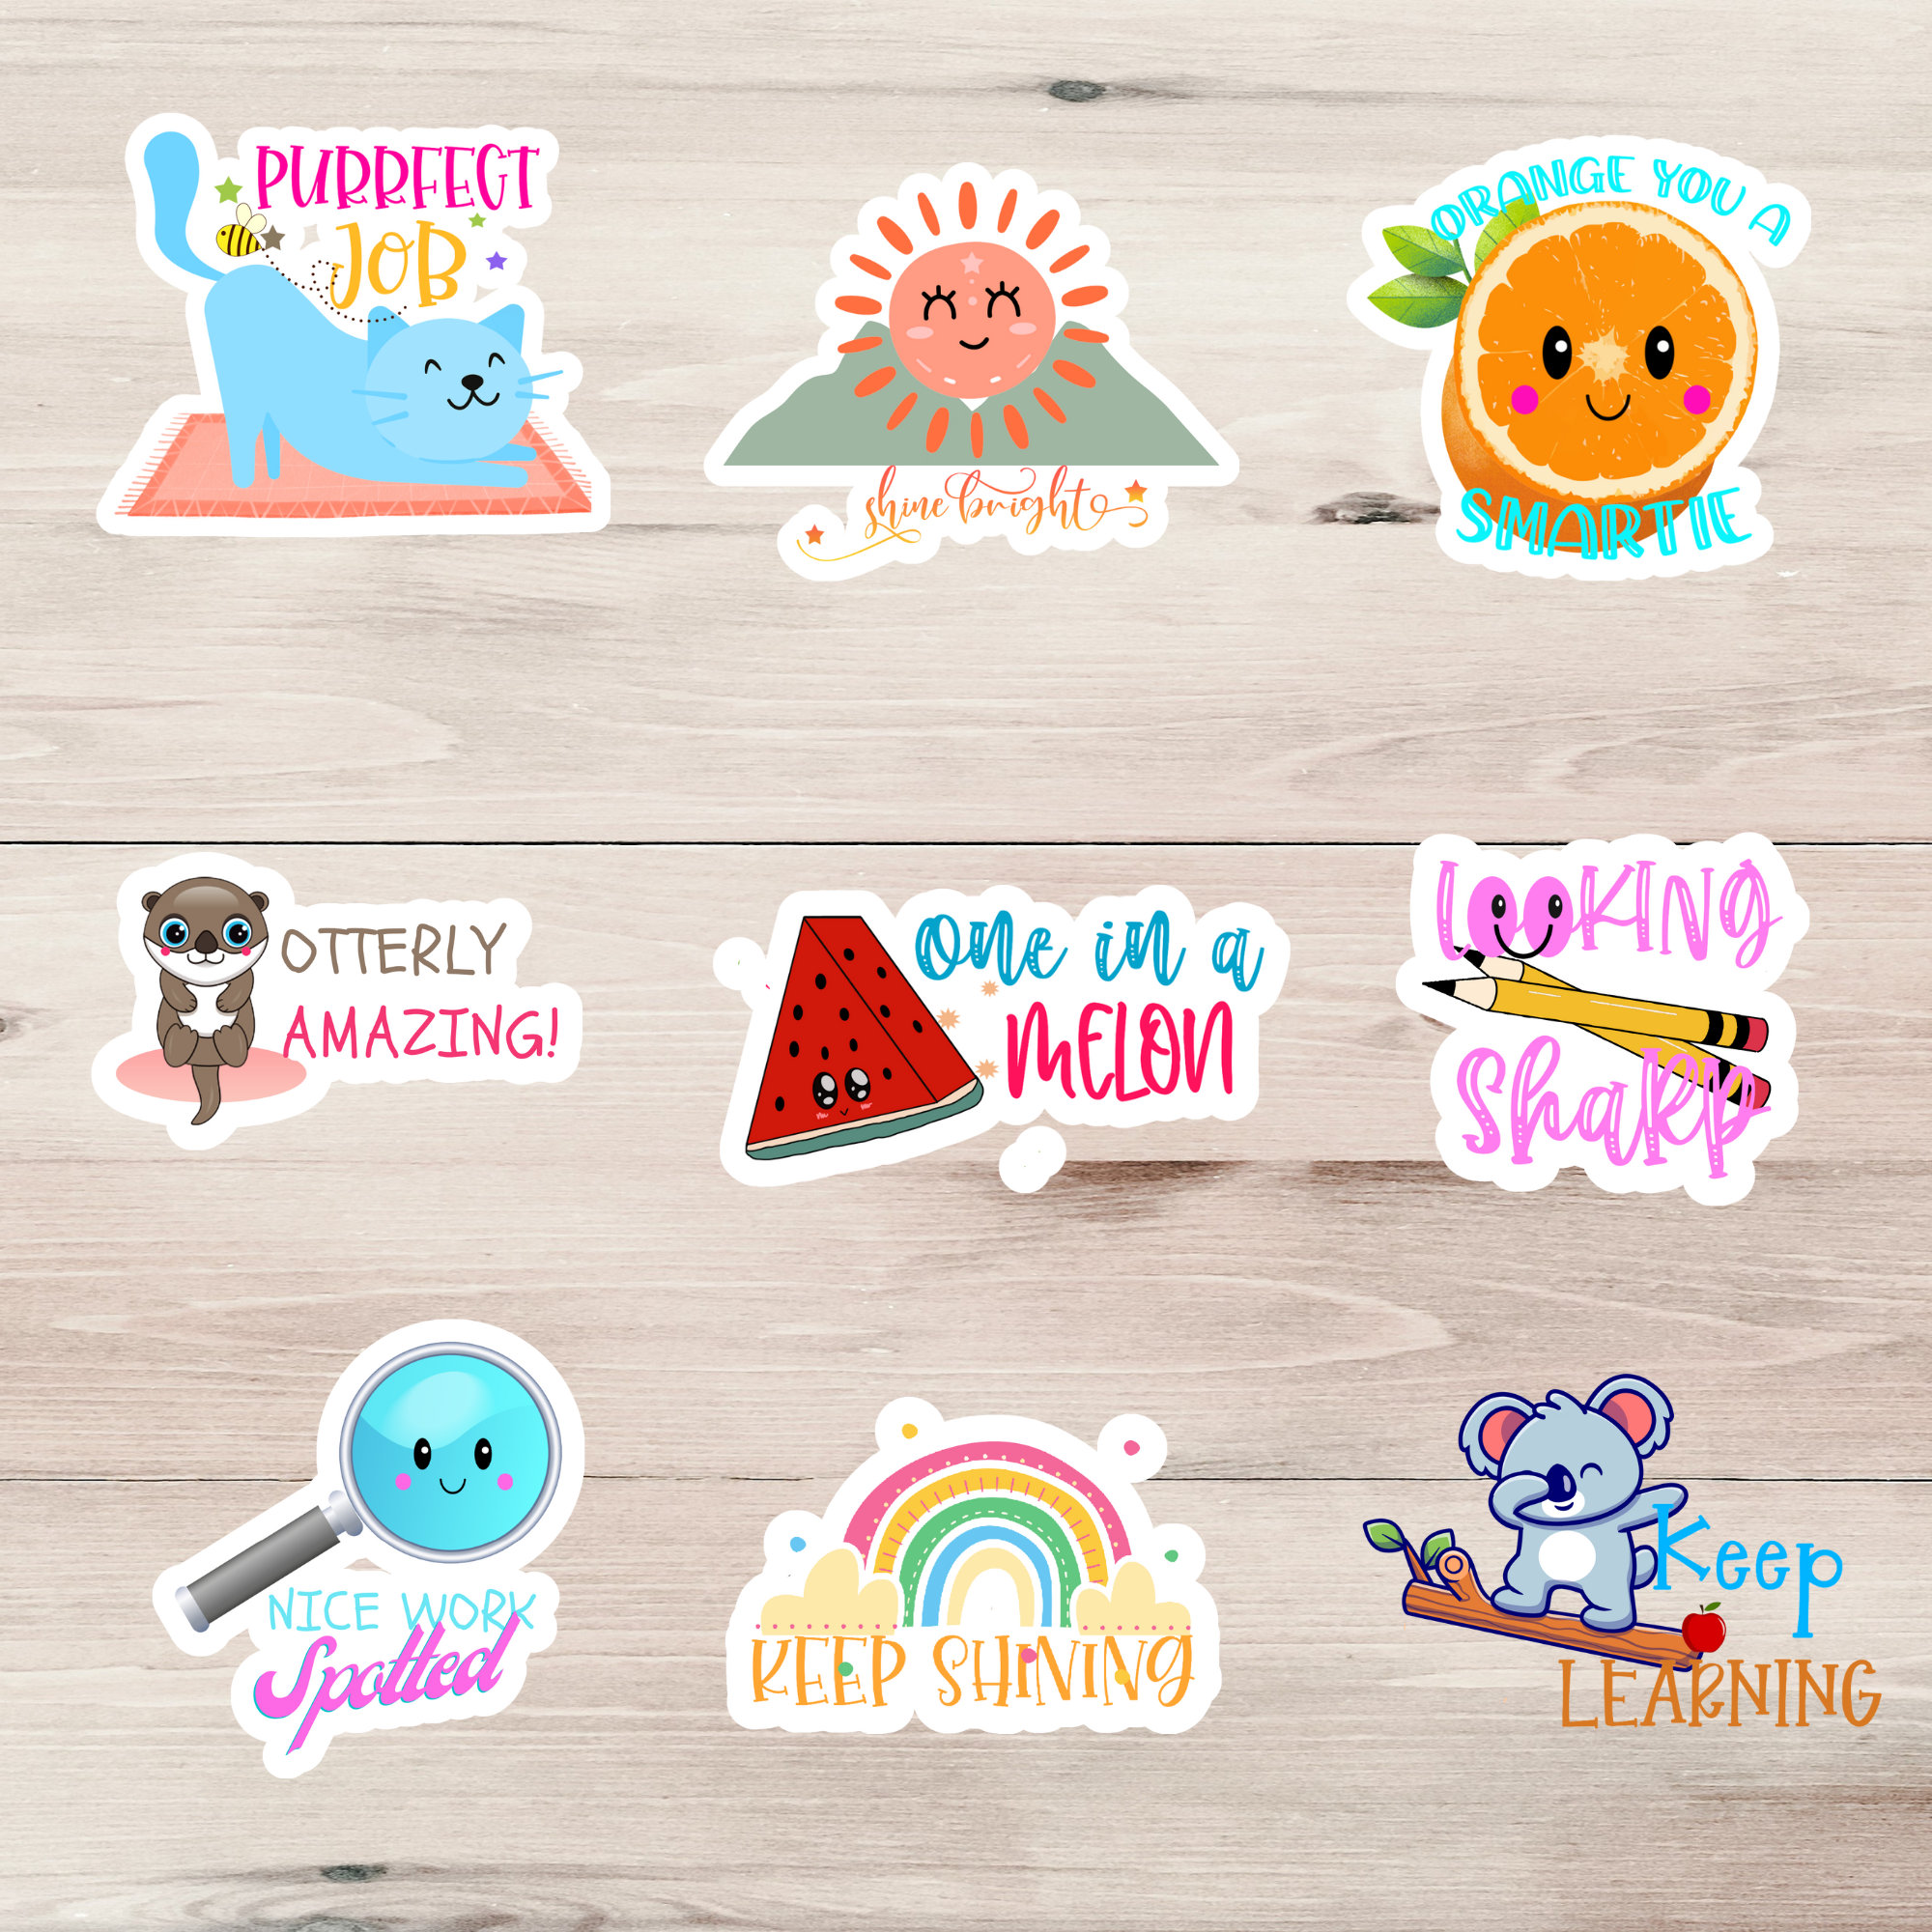 Motivational stickers for English teachers